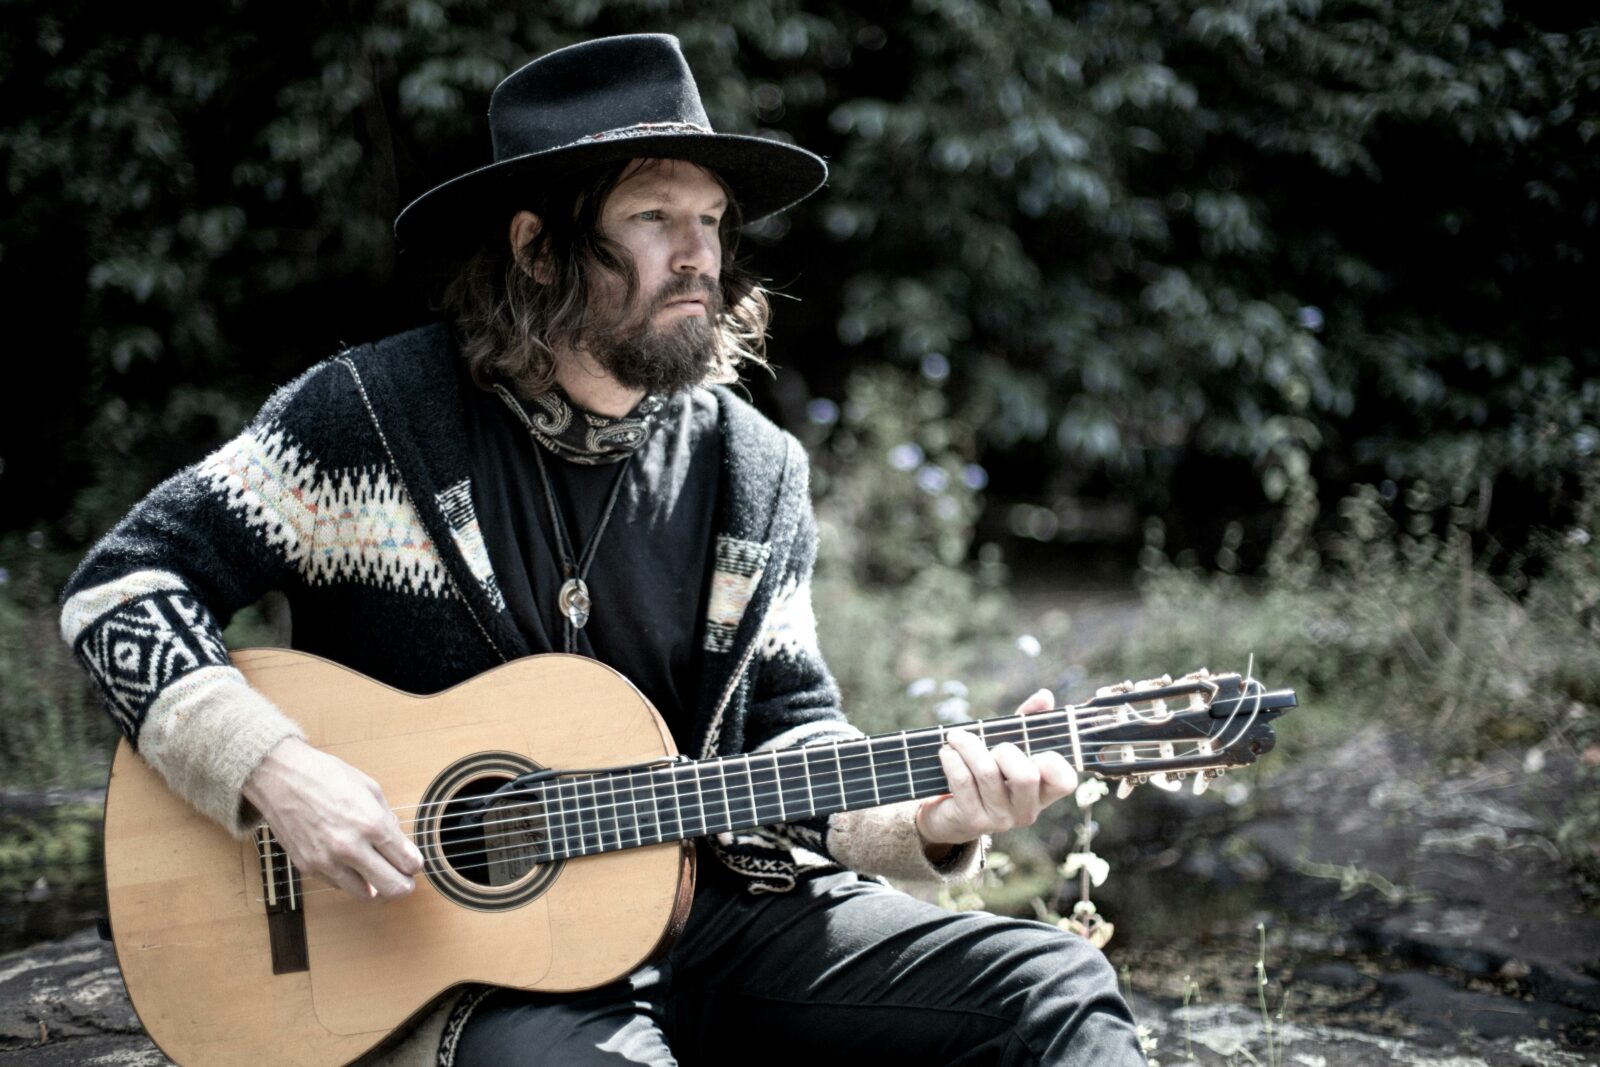 Musician Paul A. George in traditional western attire, sporting a beard. playing a guitar.